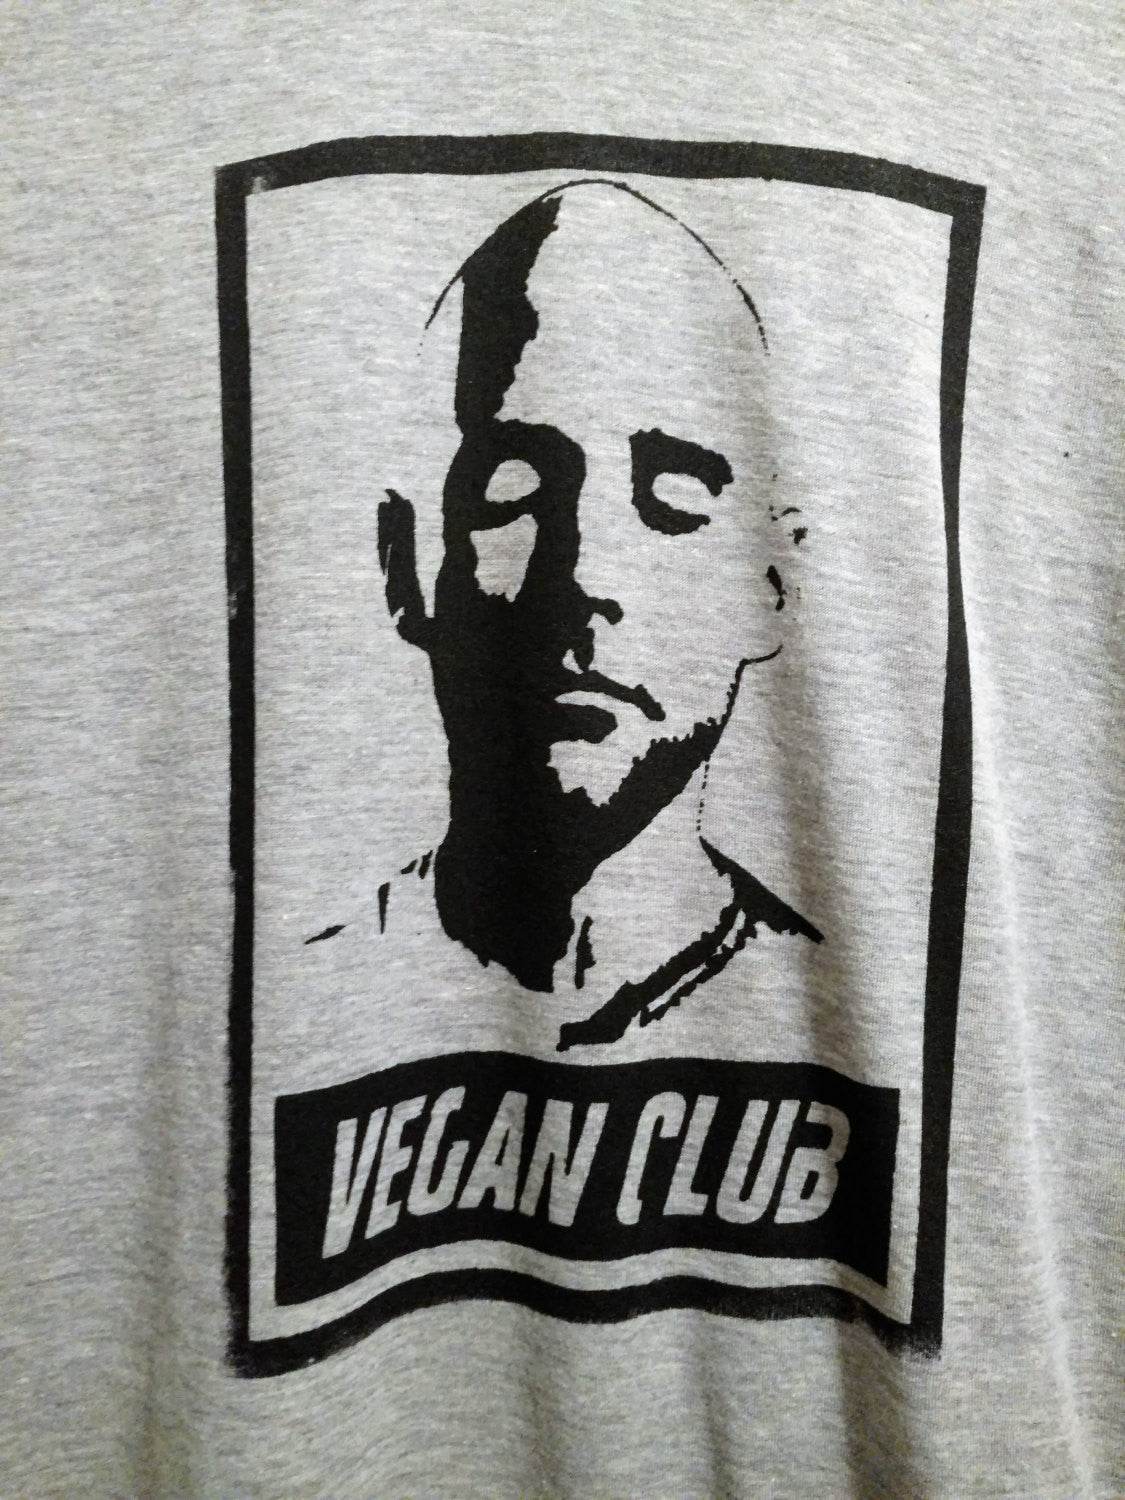 Organic Made in USA T-shirt "Vegan Club" featuring Moby